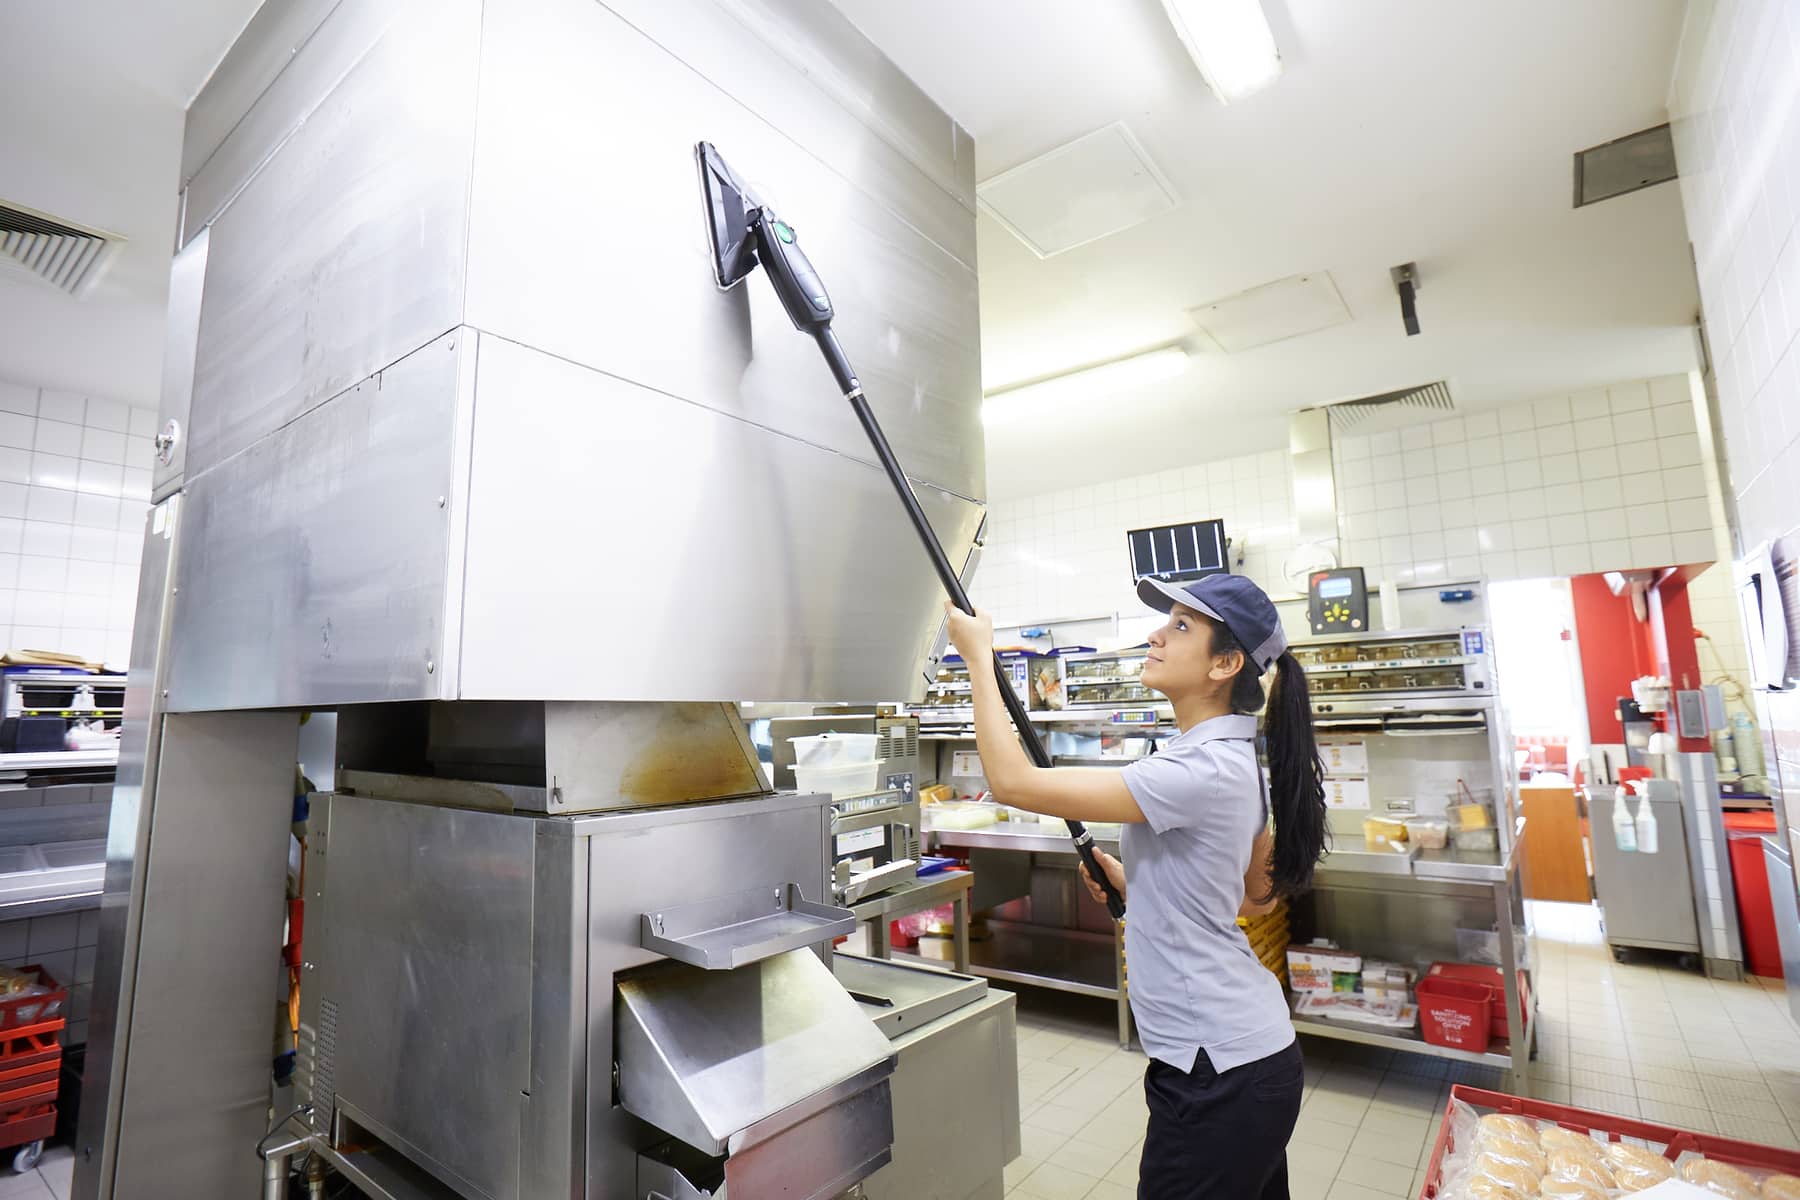 Restaurants Food Service Cleaning Commercial Kitchen Cleaning Tools